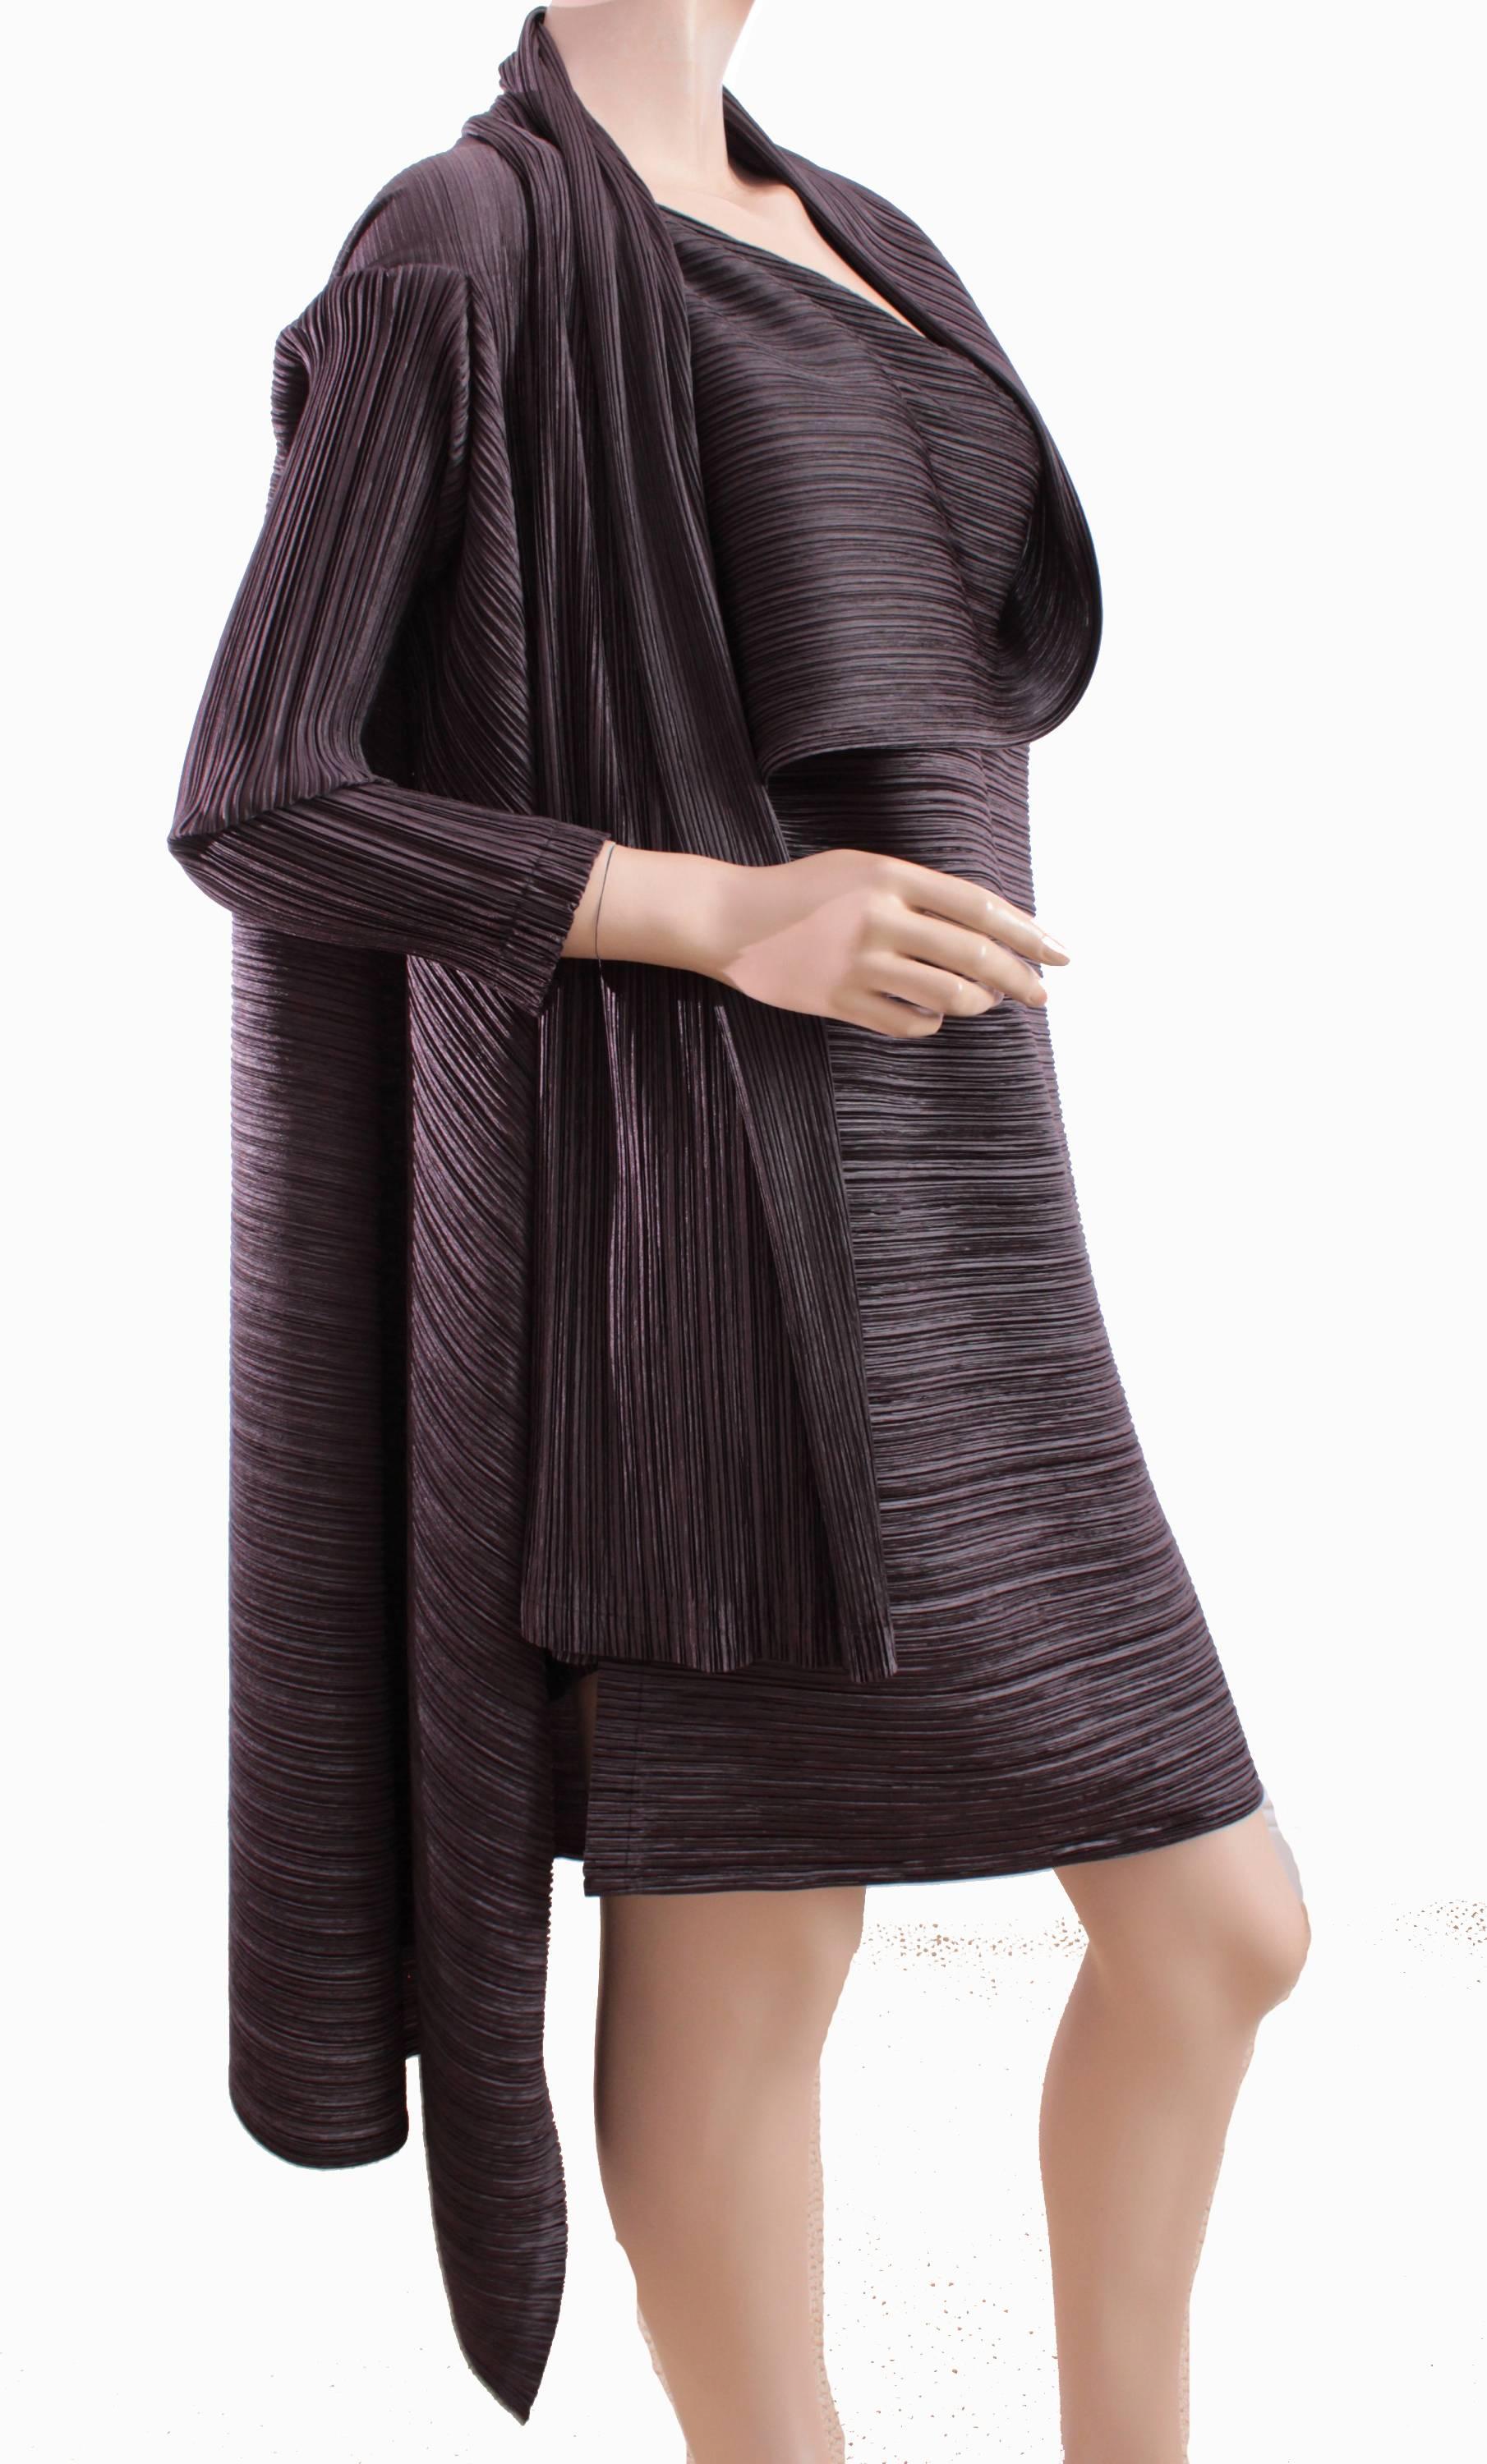 This incredible jacket was made by Japanese designer ISSEY MIYAKE, likely in the early 2000s. It features his signature pleating in a shimmering brown poly fabric, and features two buttons at the shoulders which allow you to drape in several ways.